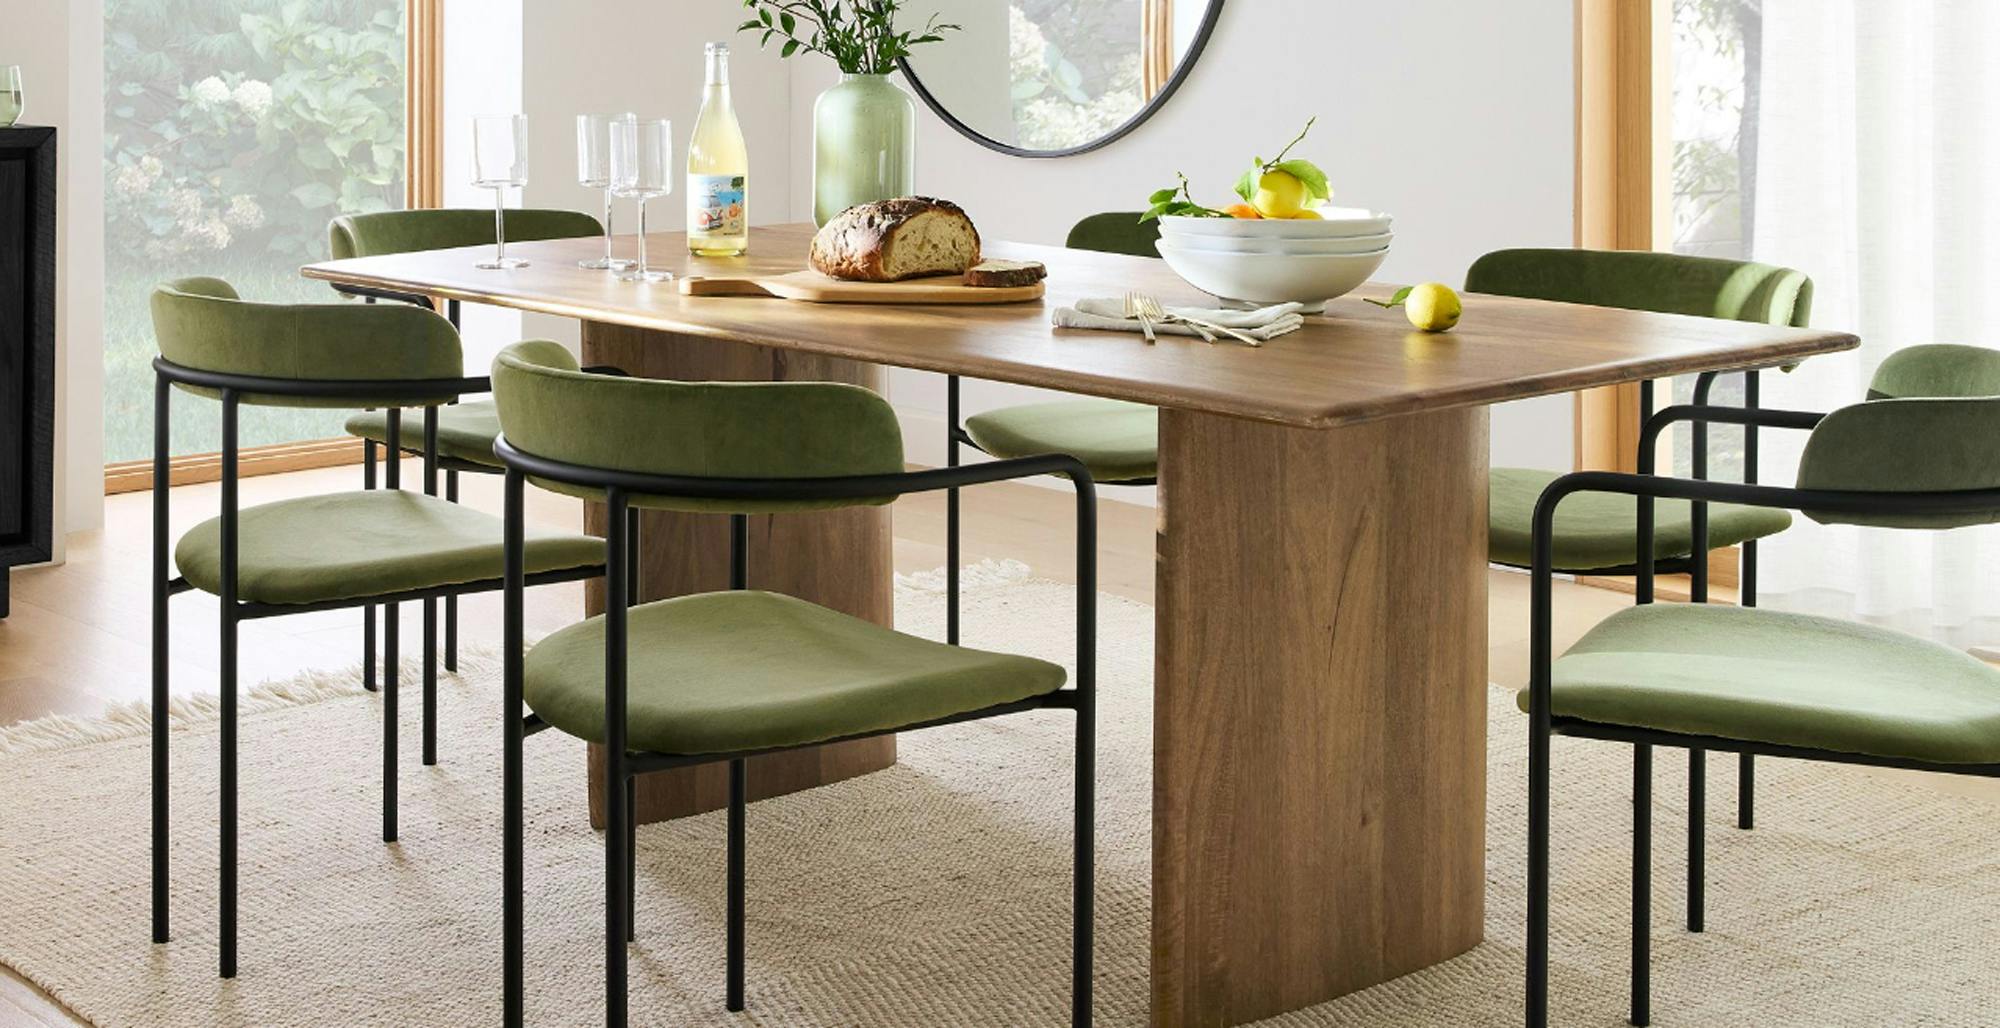 You Can Save Up to 70% on These West Elm Dupes and Lookalikes